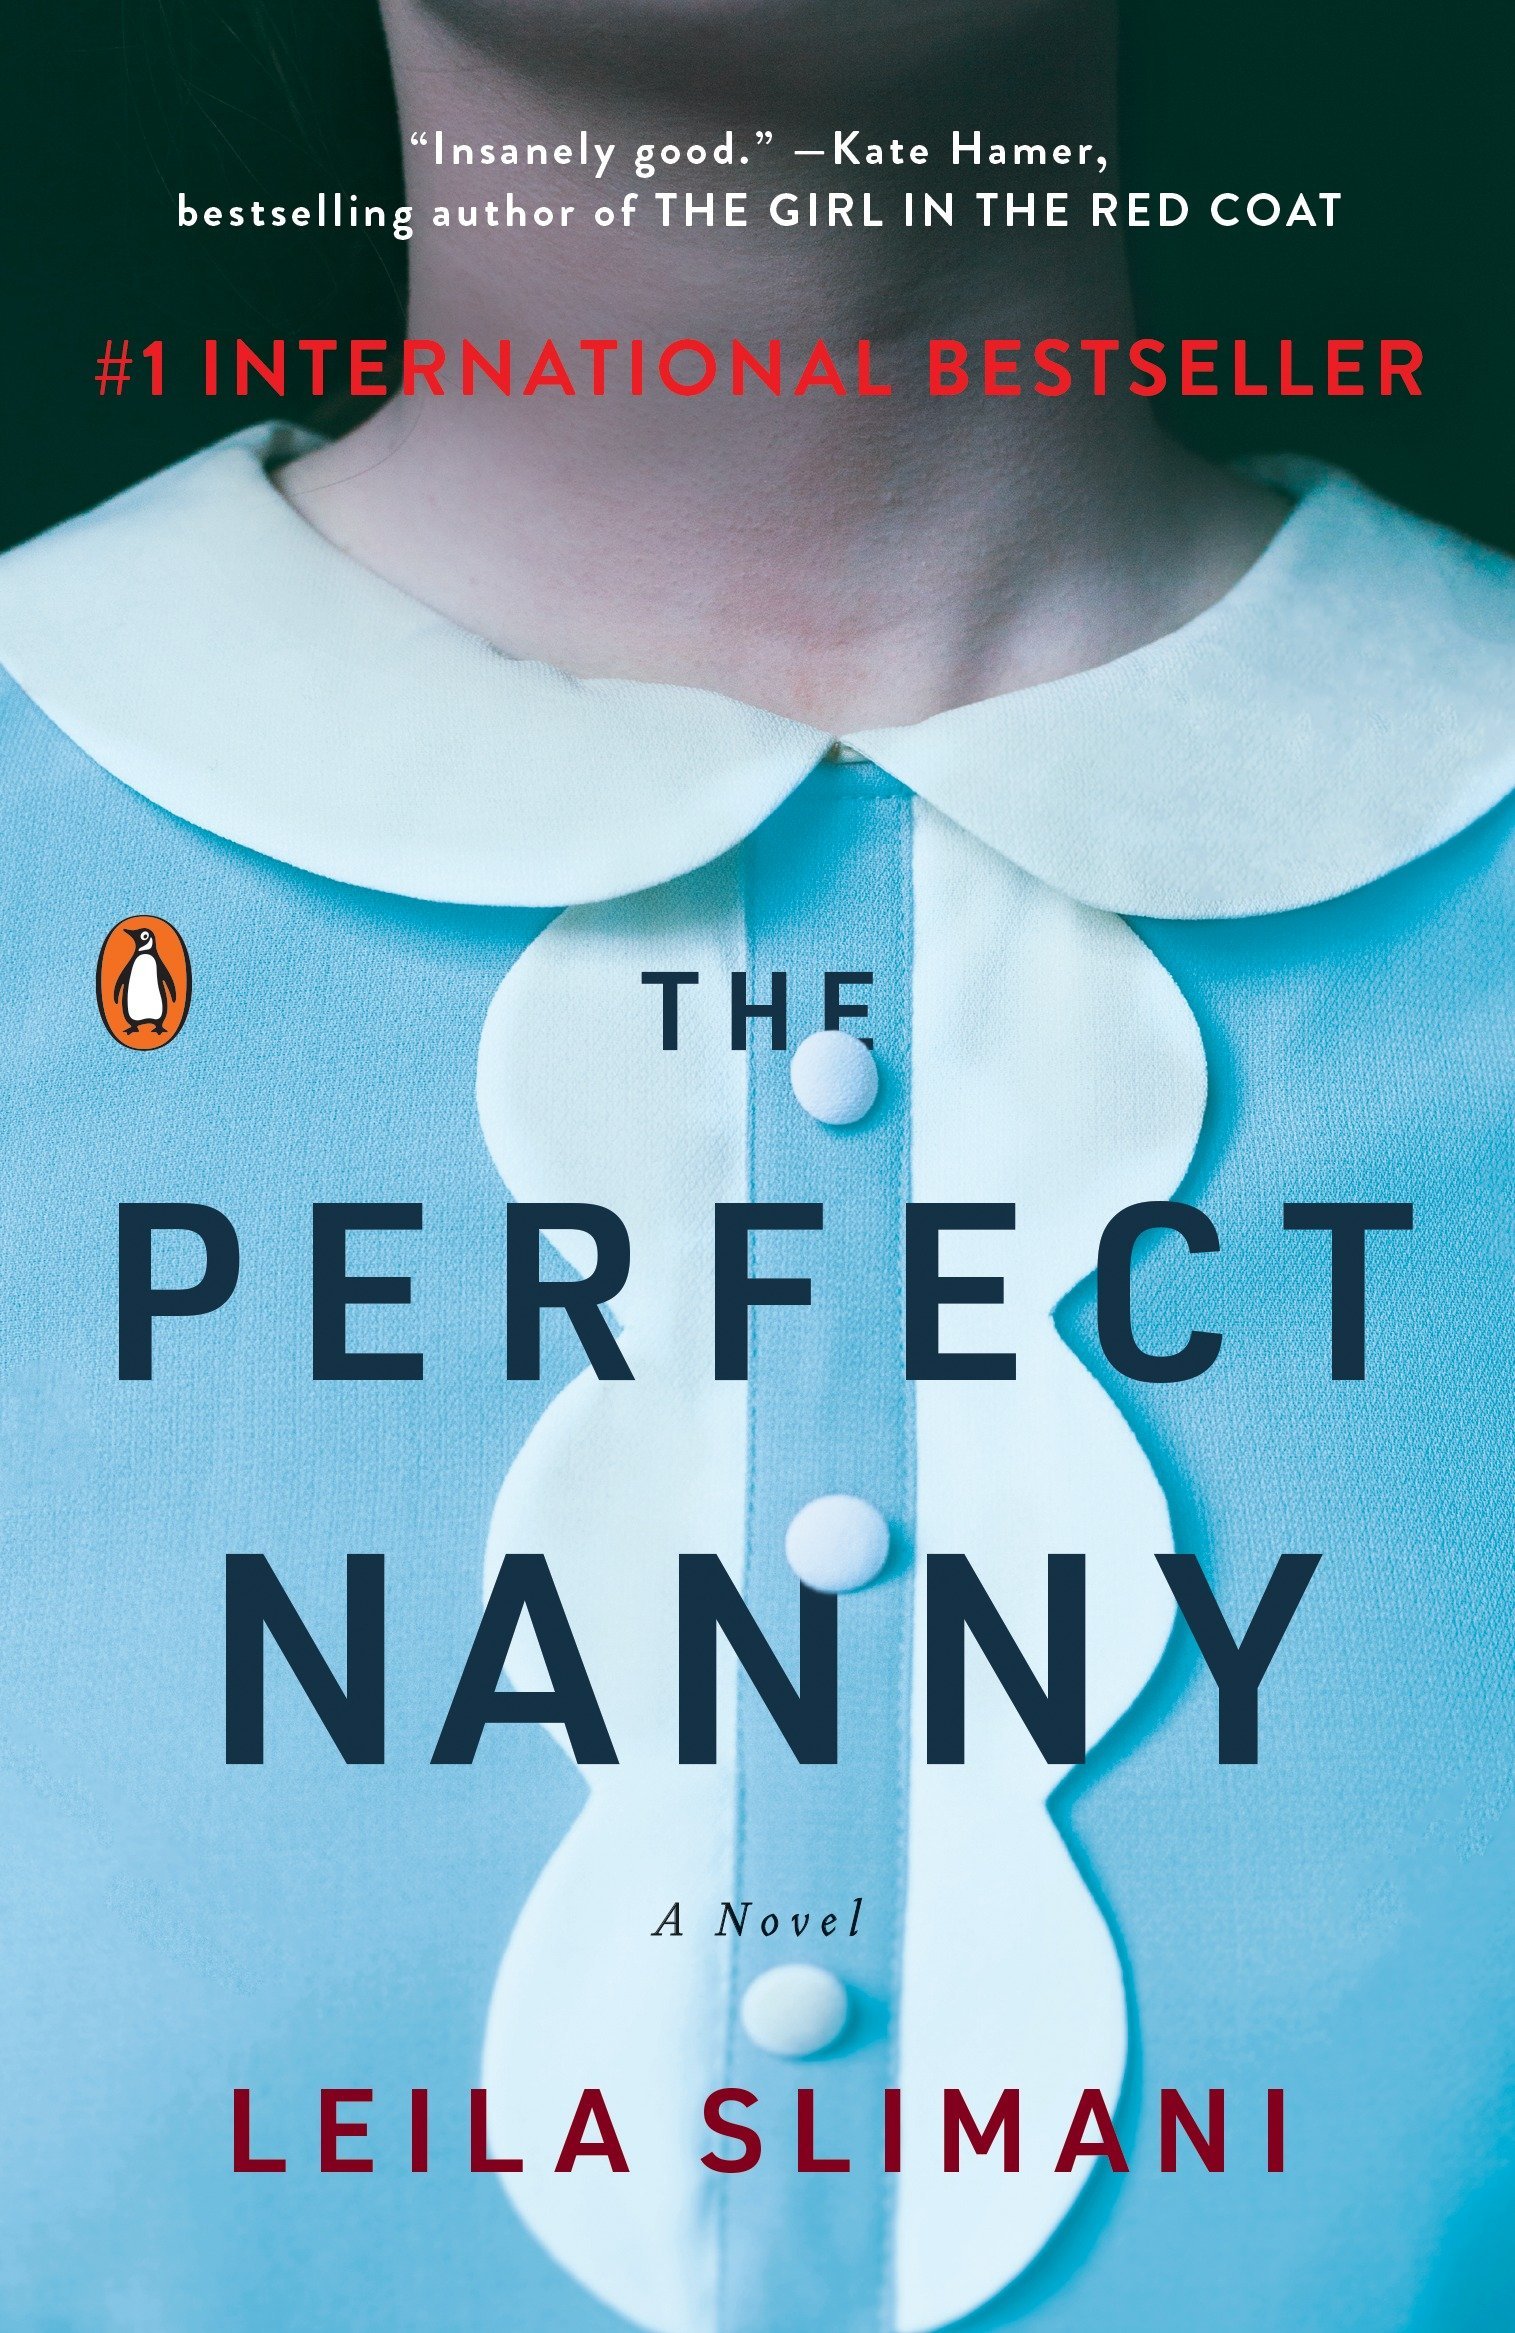 A book cover for "the perfect nanny" by leila slimani, featuring a close-up of a light blue shirt with a classic peter pan collar, and the top of a white sweater, hinting at the central character of the story without showing a face.